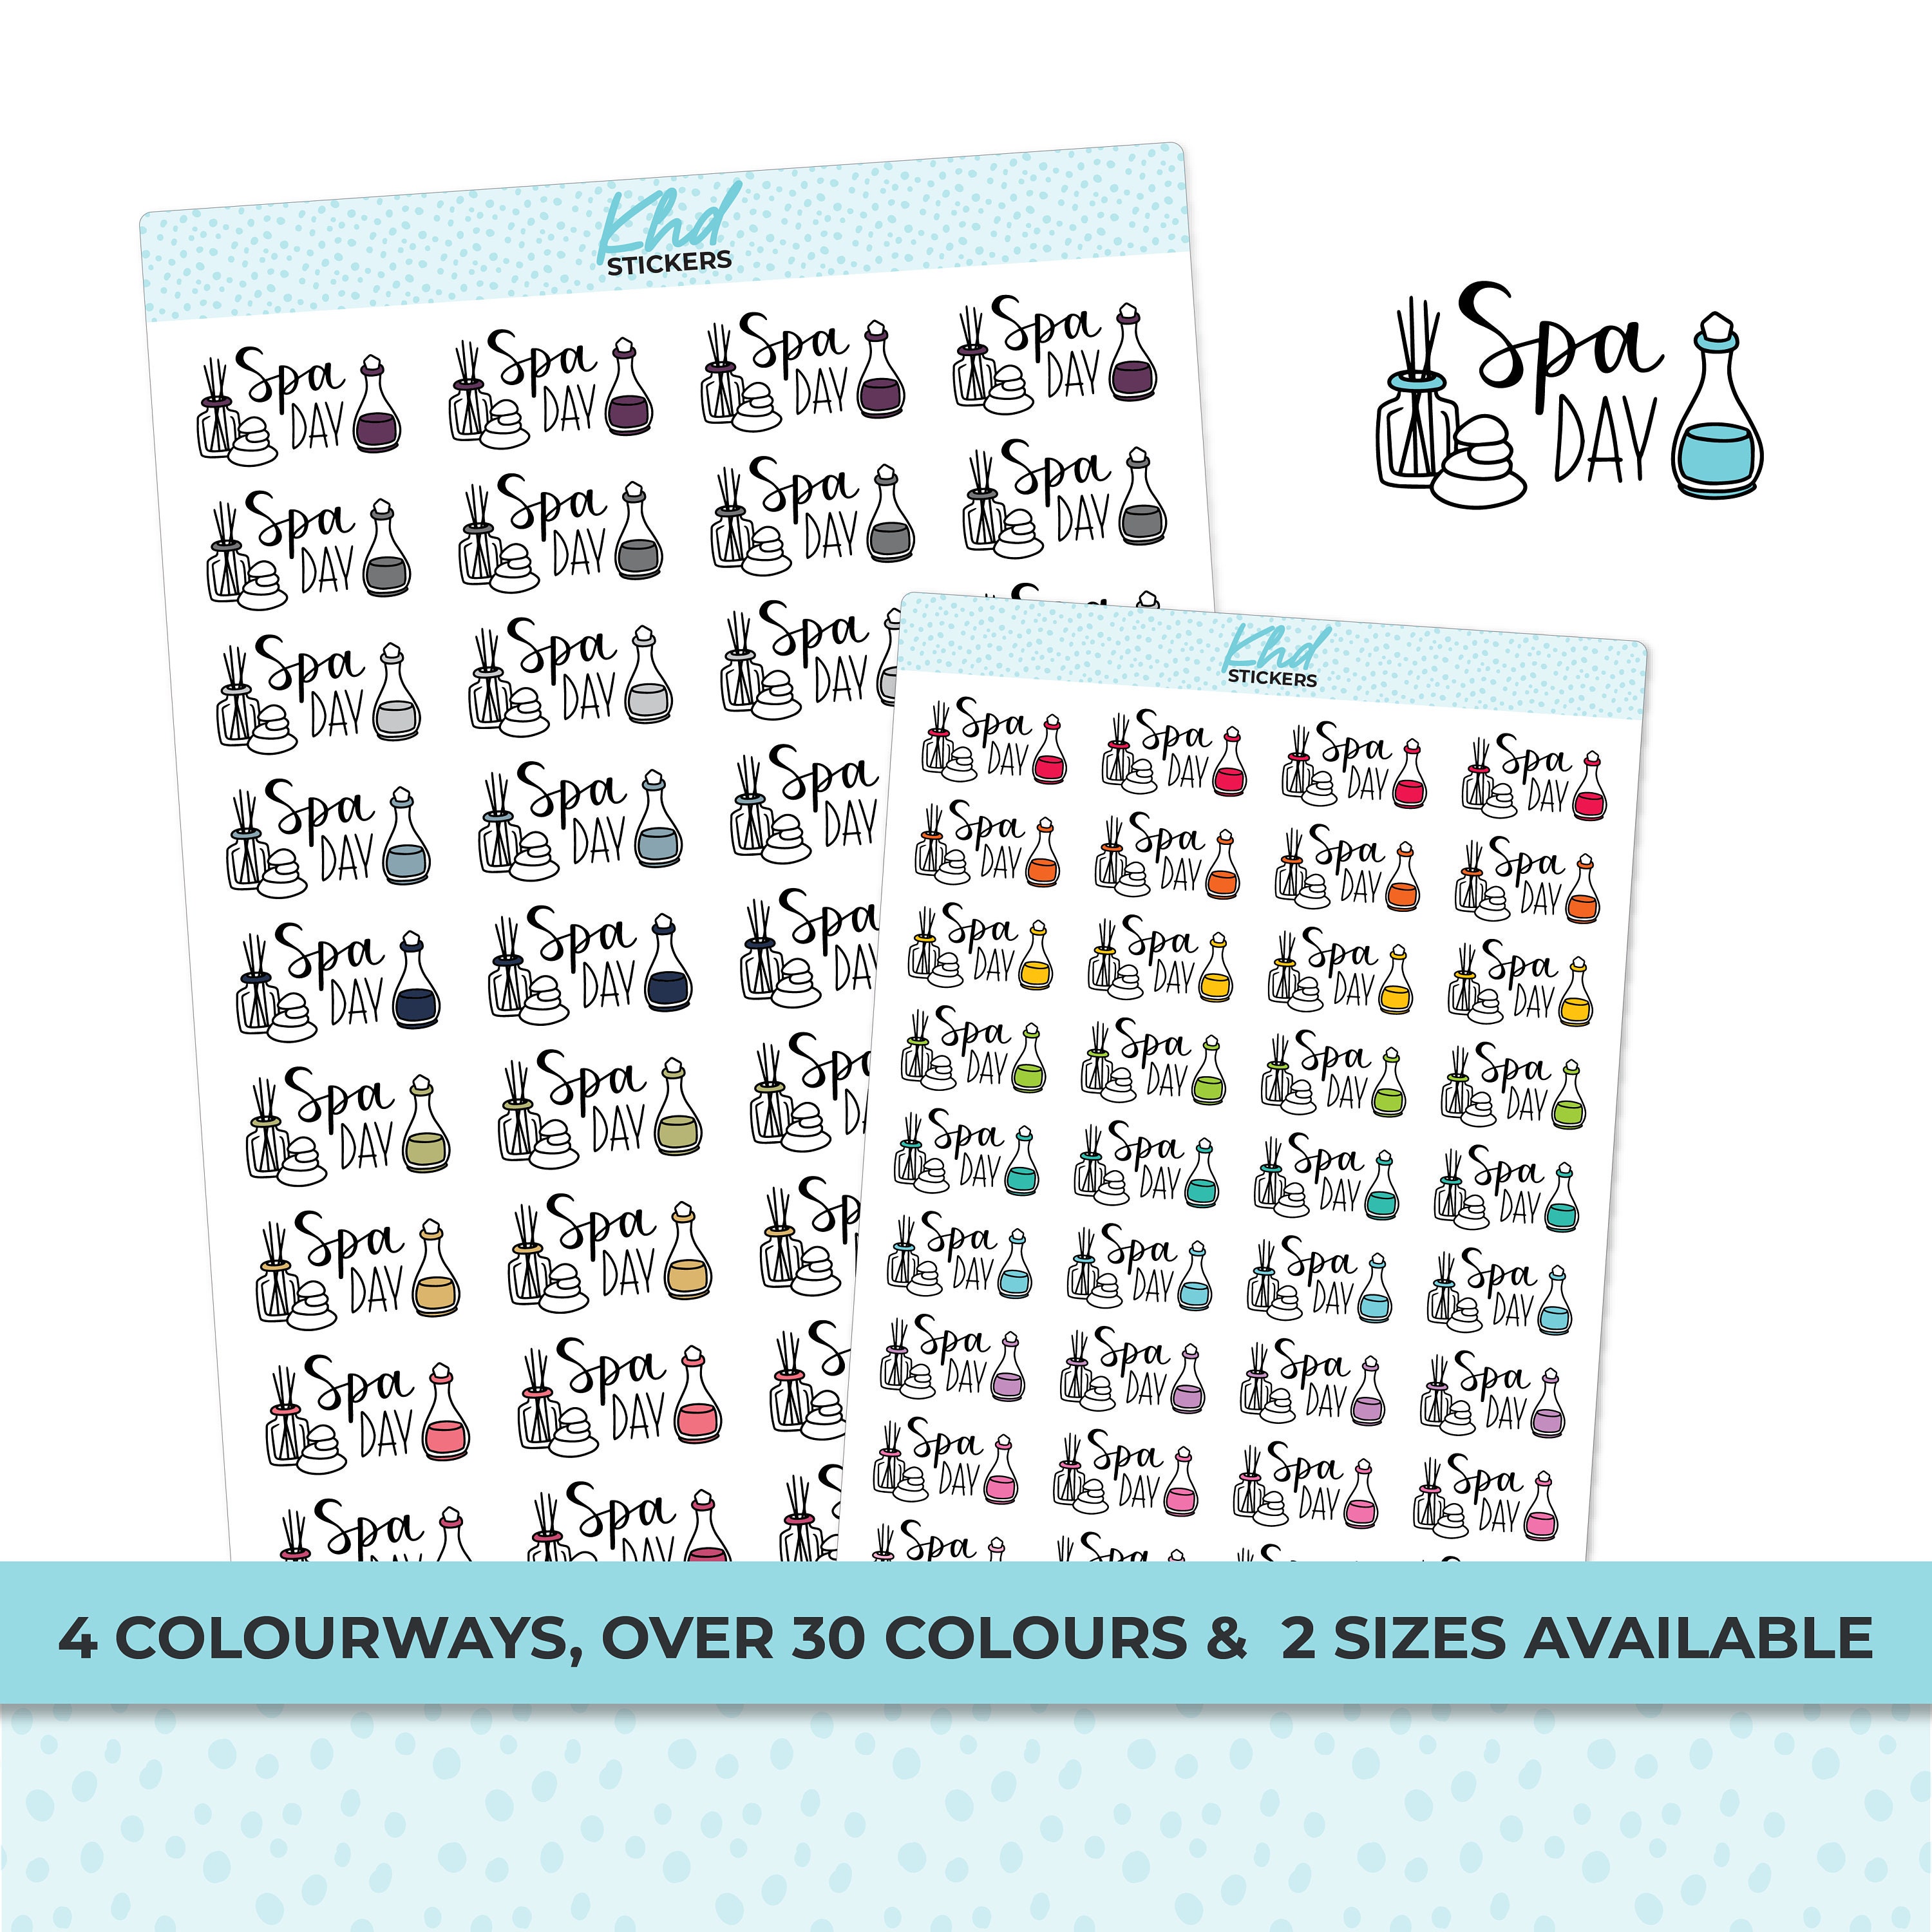 Monthly Review Stickers, Planner Stickers, Two Size and Font